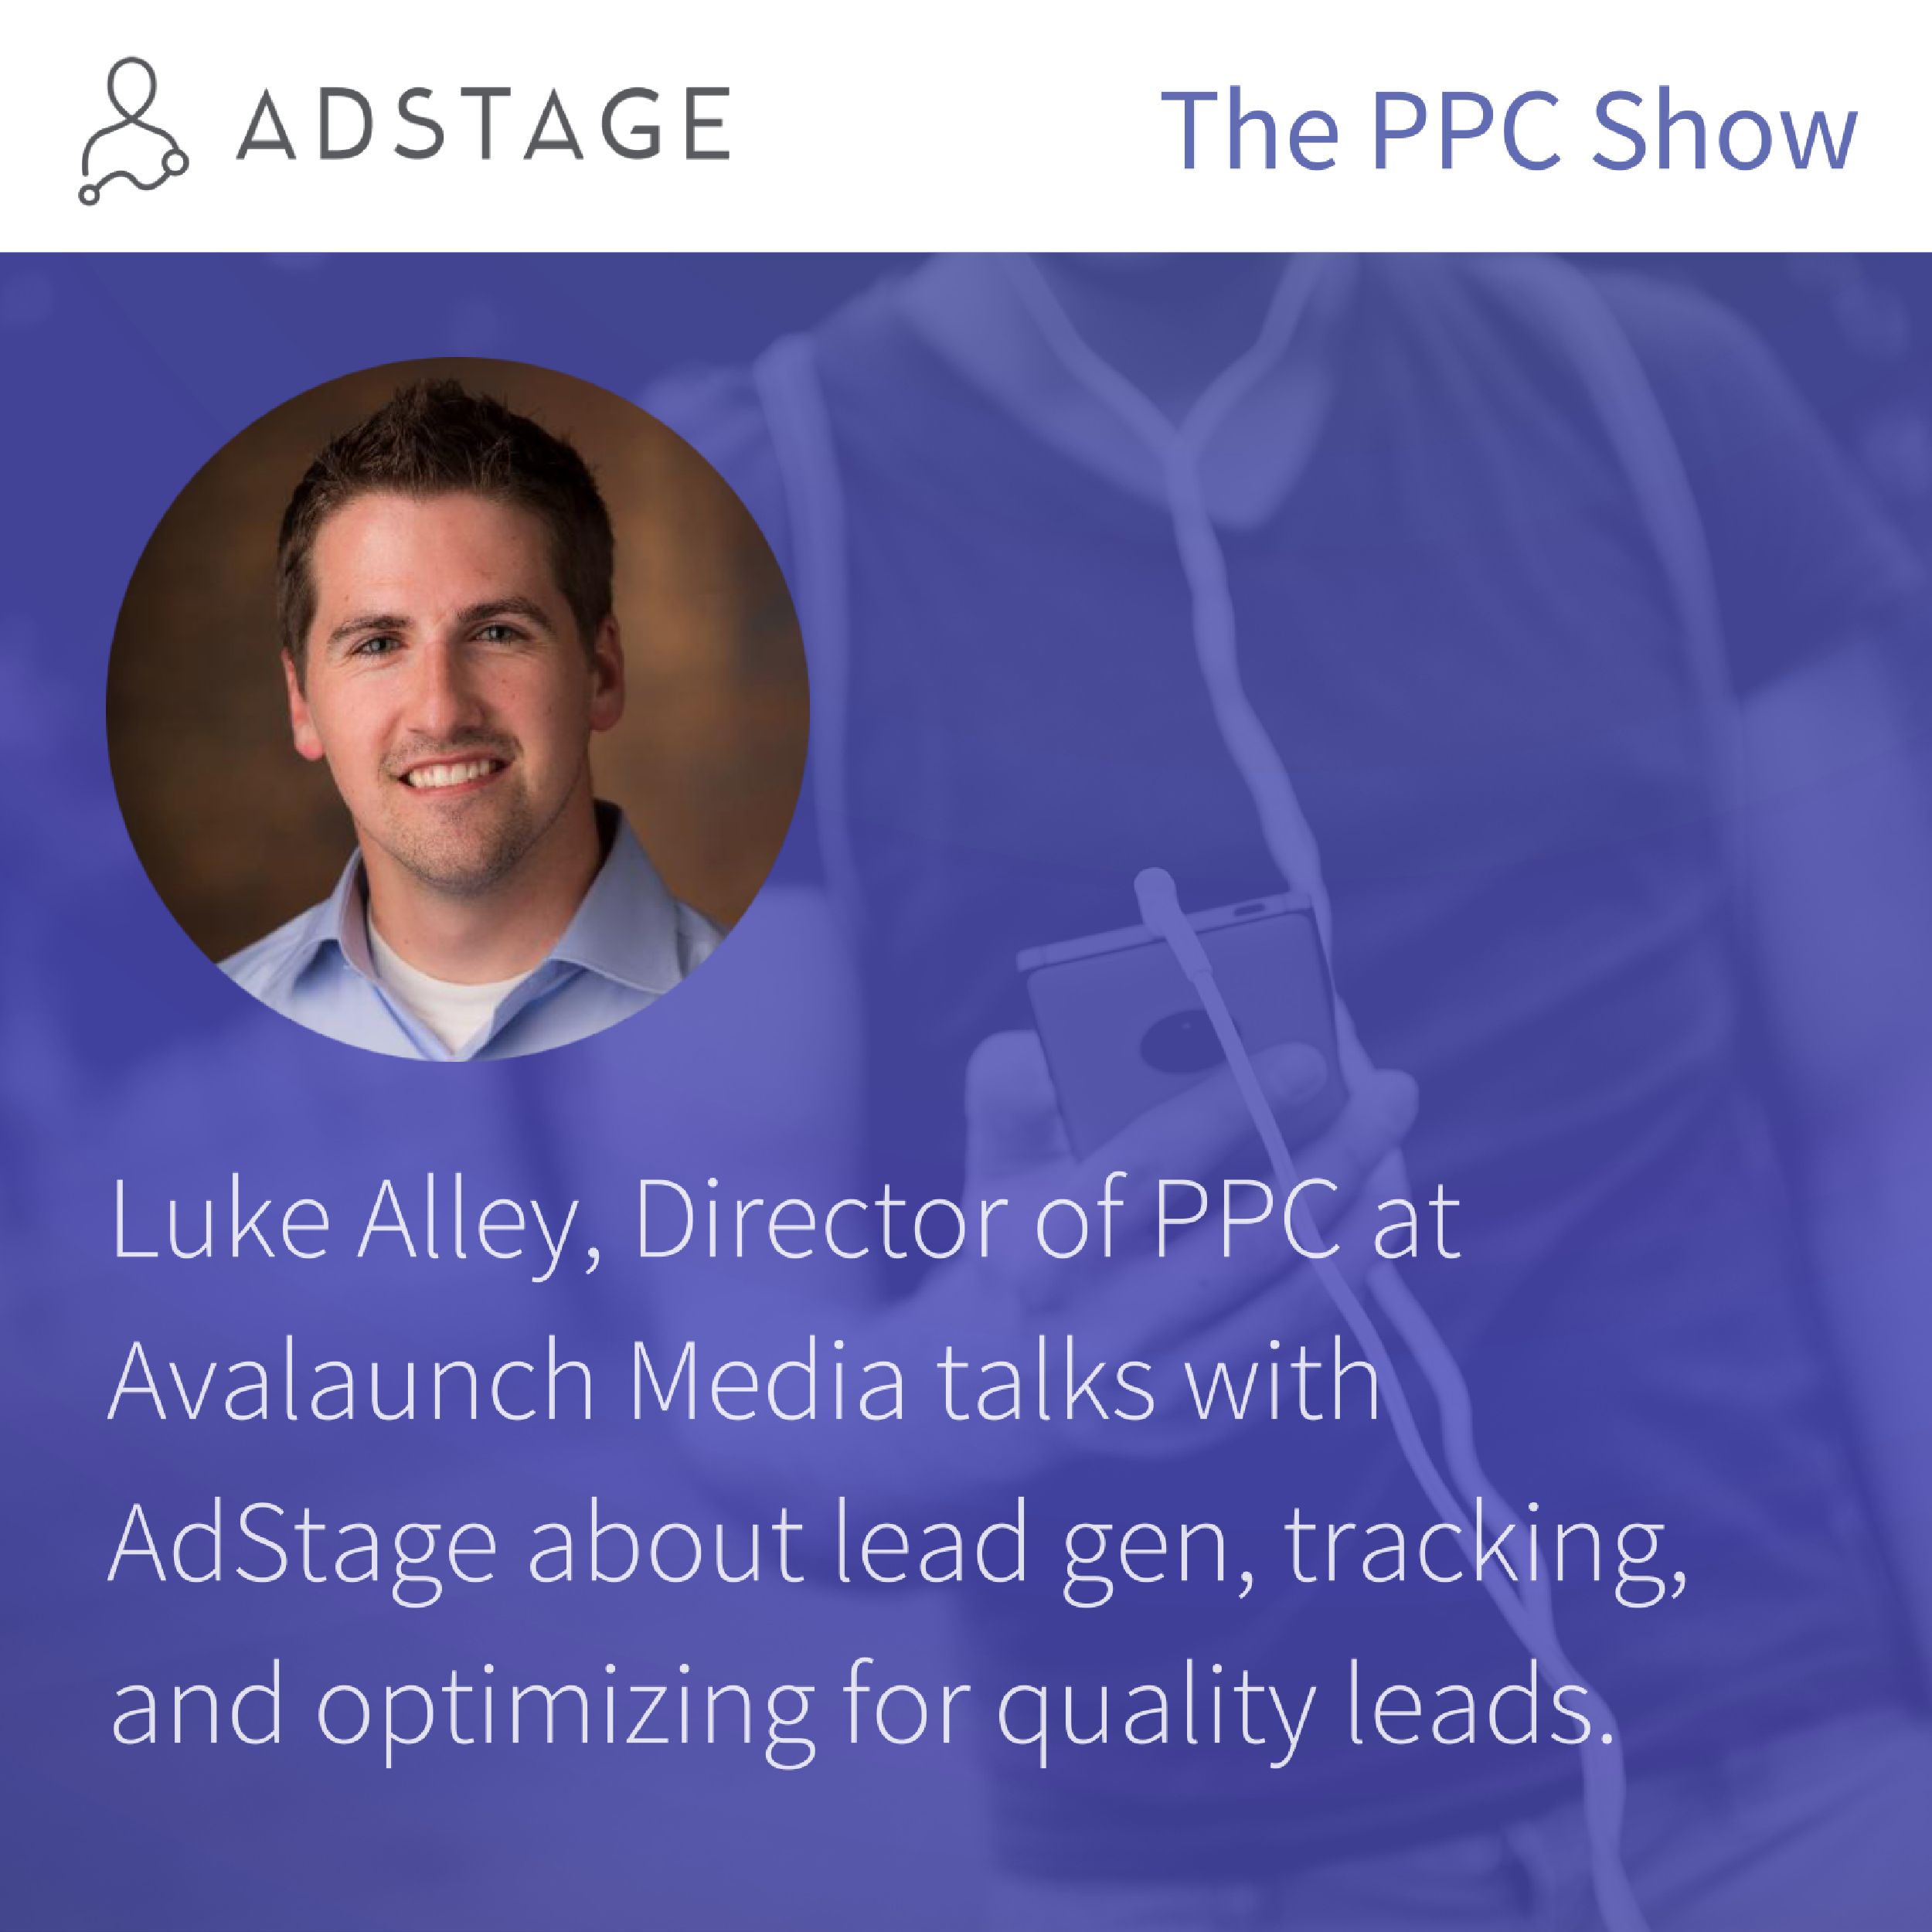 Episode #036 - Luke Alley, Director of PPC at Avalaunch Media